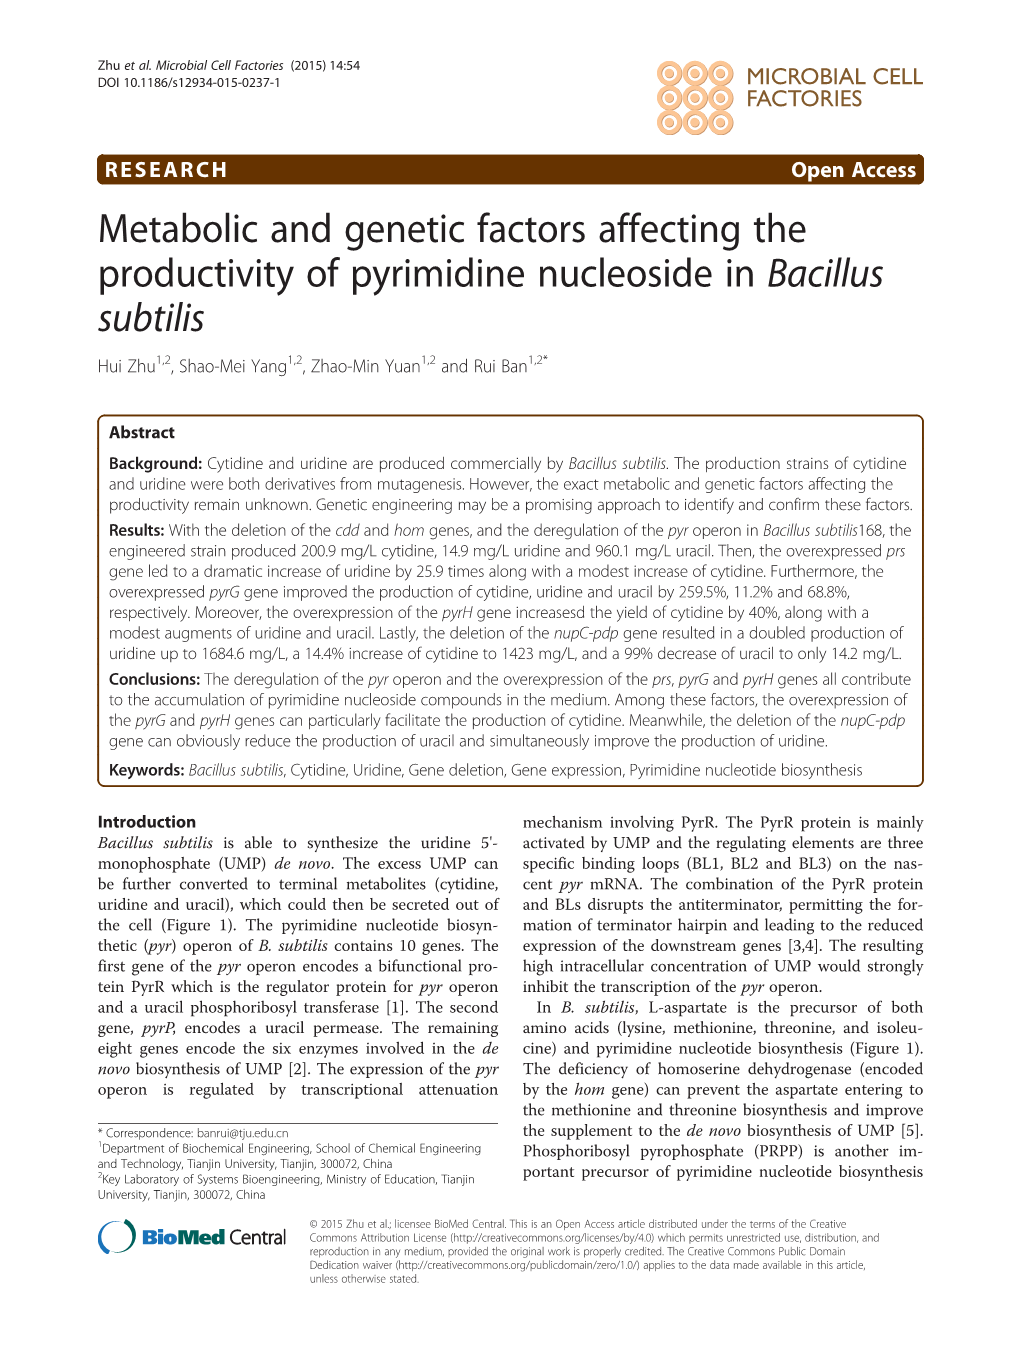 Metabolic and Genetic Factors Affecting the Productivity of Pyrimidine Nucleoside in Bacillus Subtilis